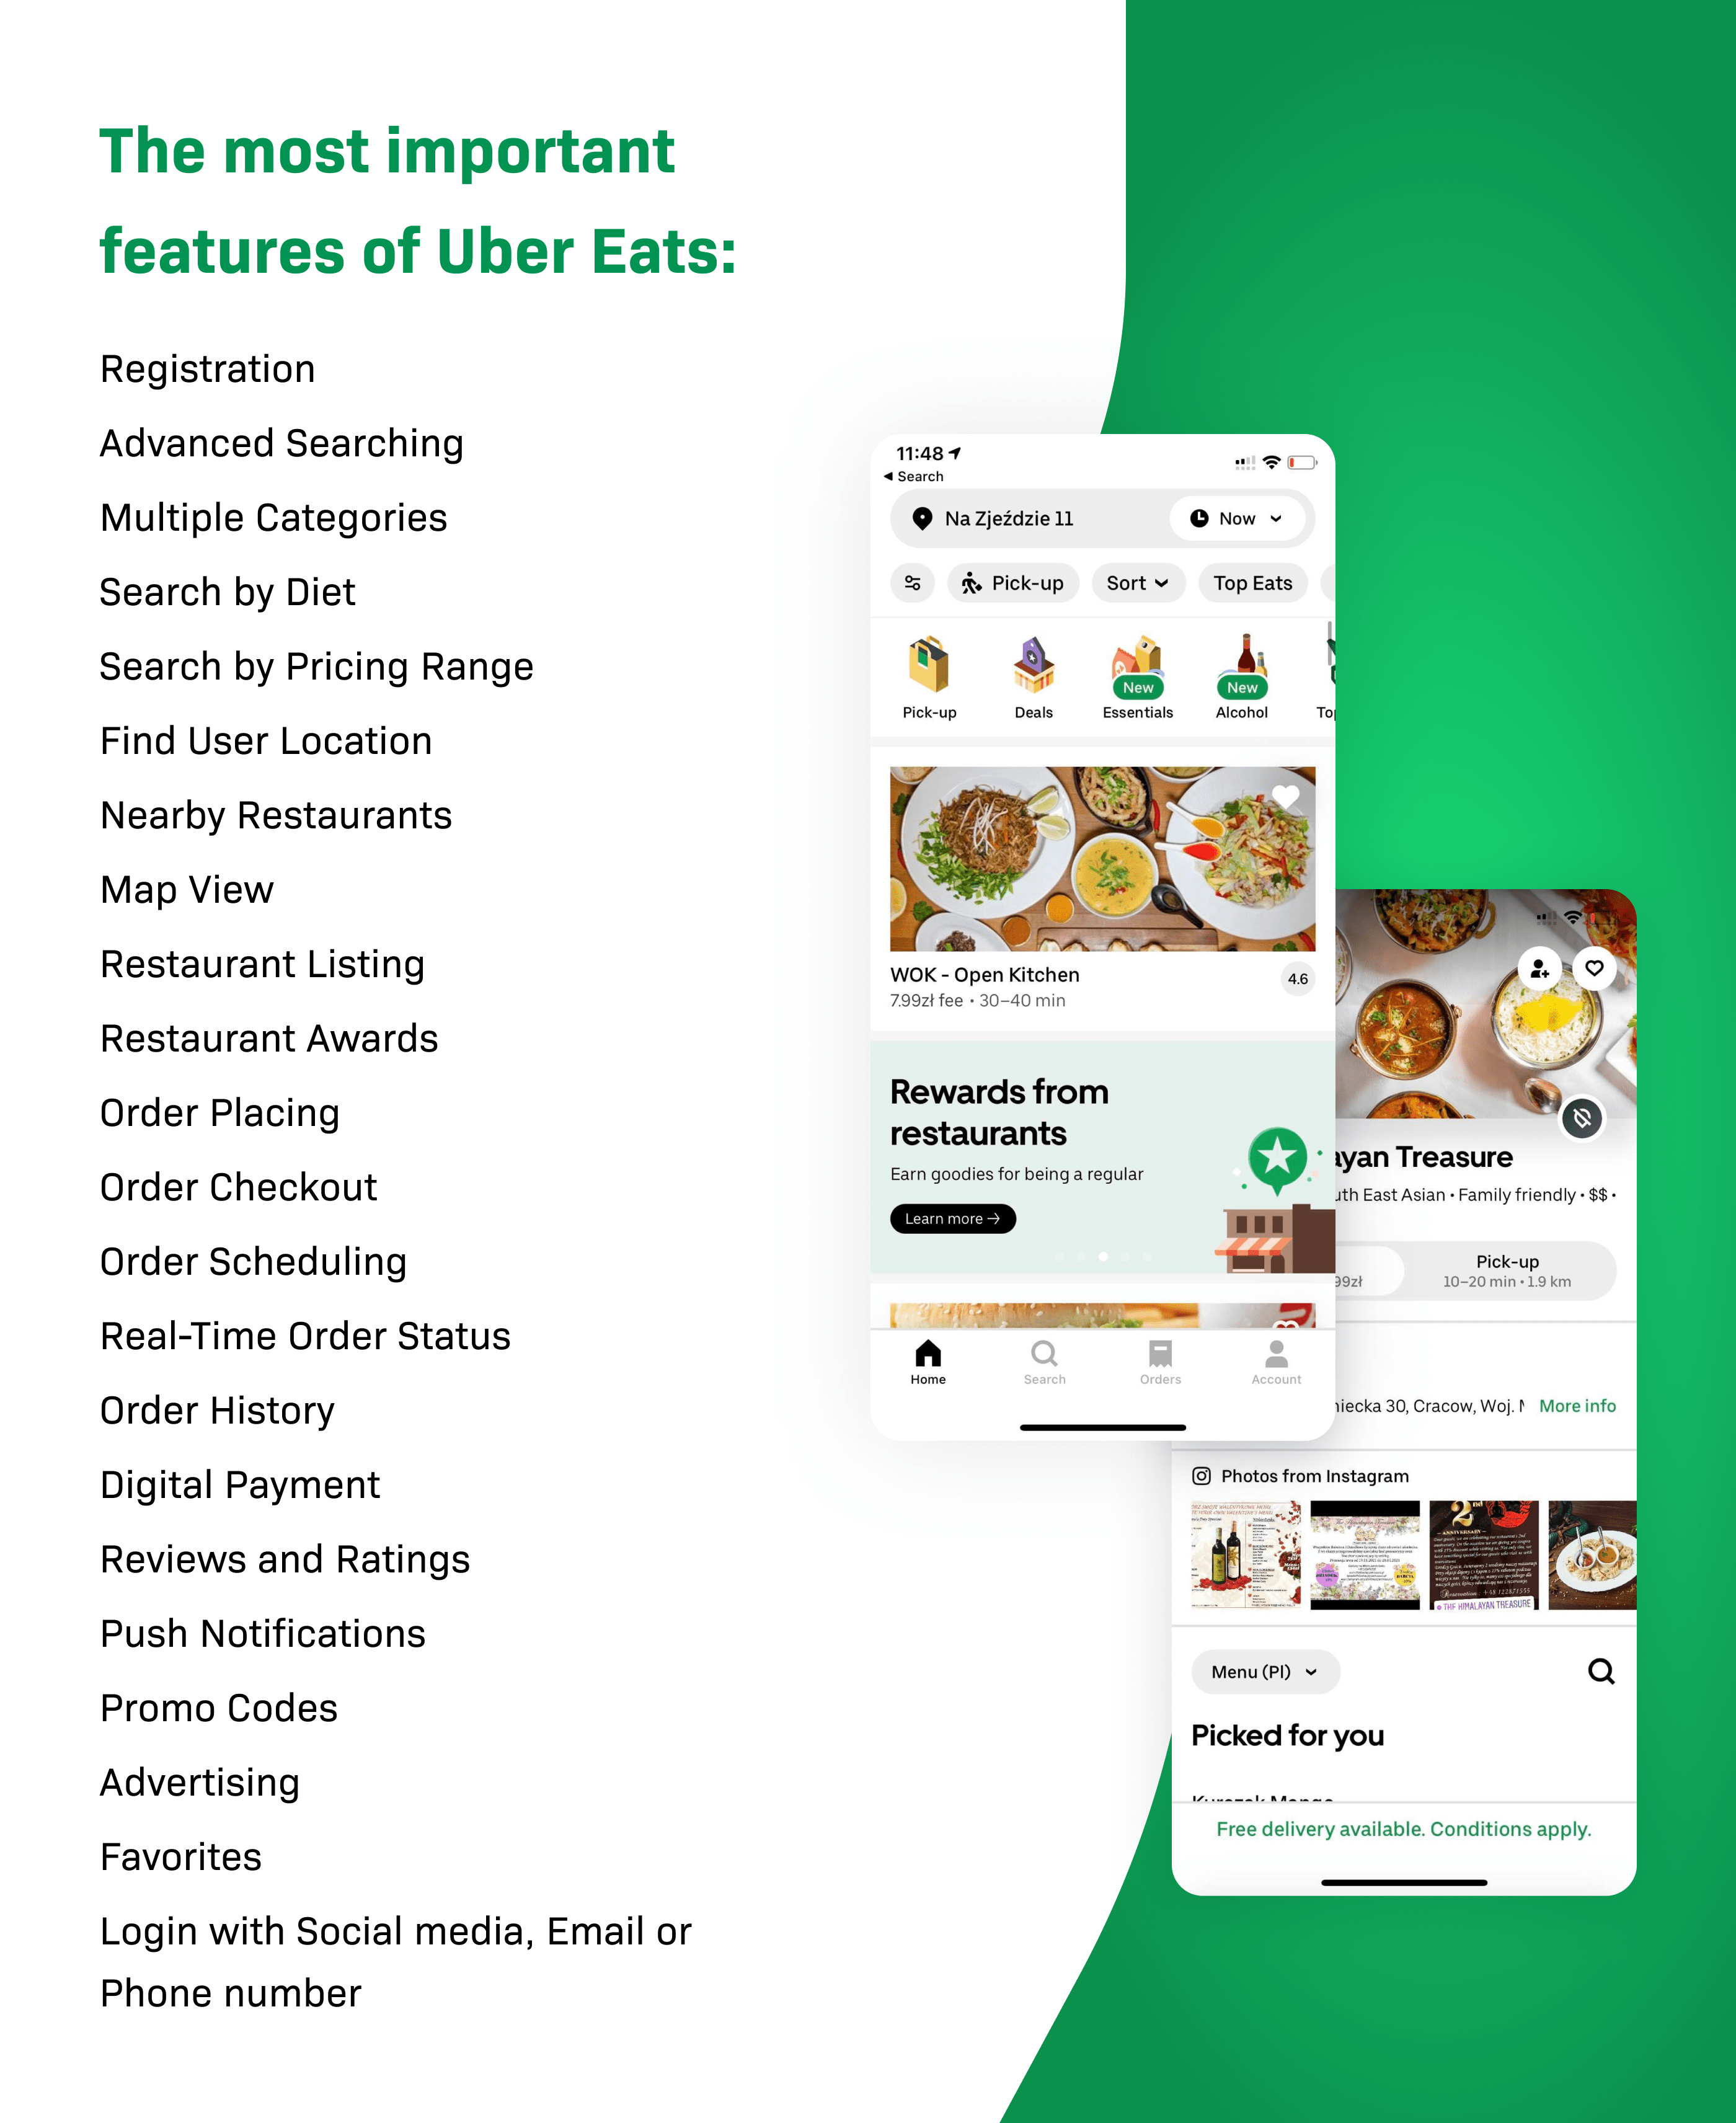 The most important features of Uber Eats